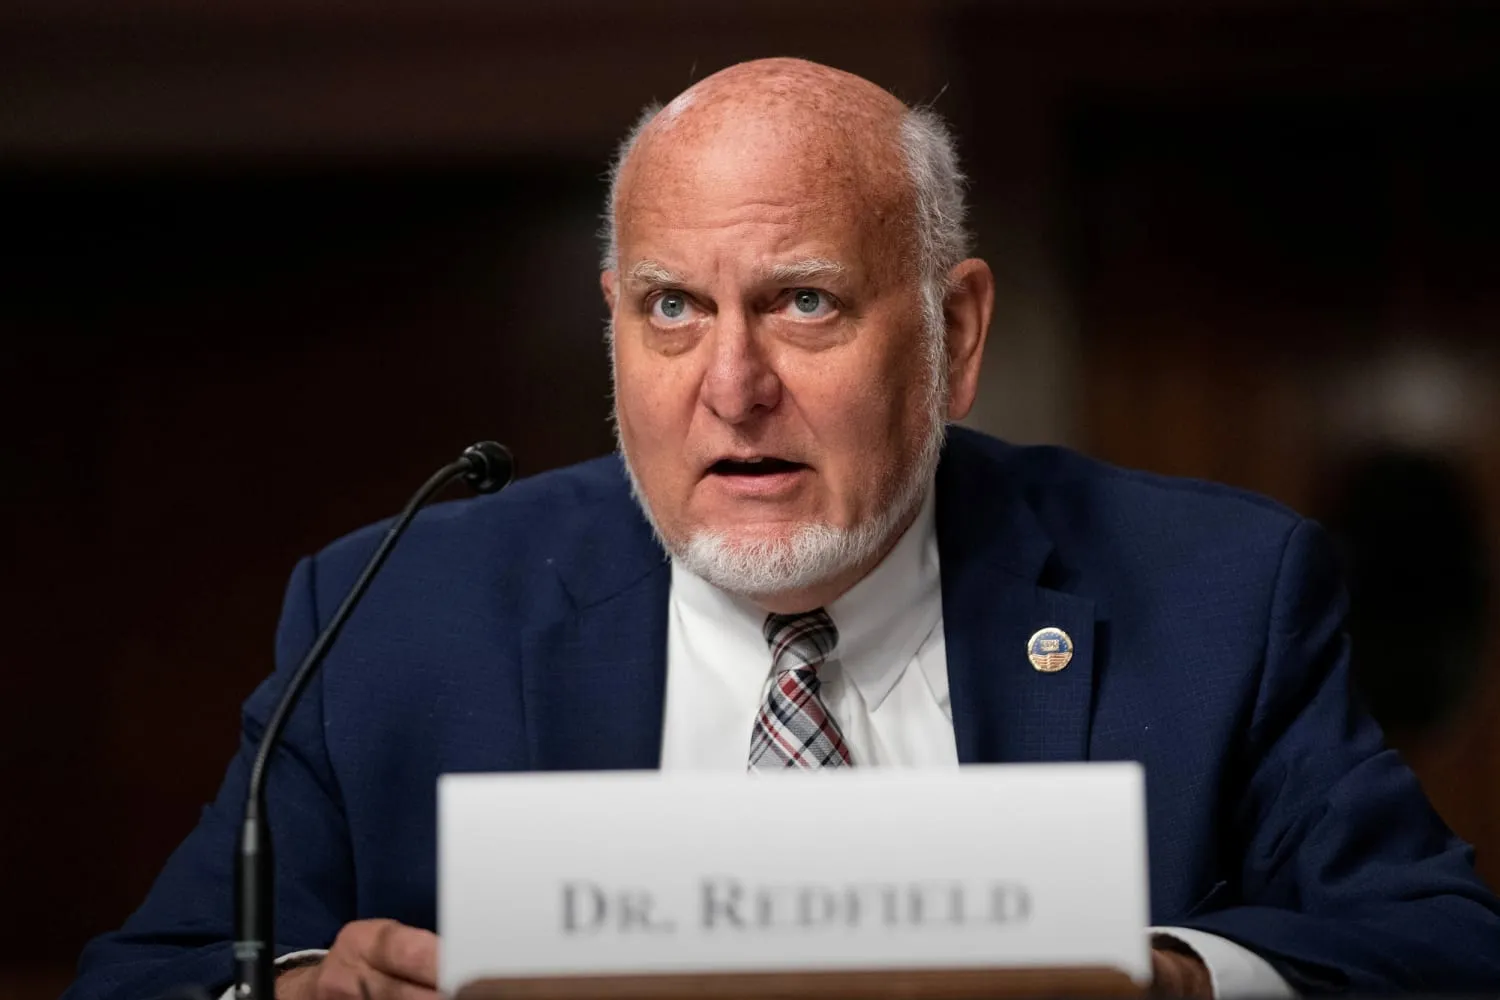 Former CDC Director Blows Whistle: Covid Vaccine Harms Deliberately ‘Covered Up’